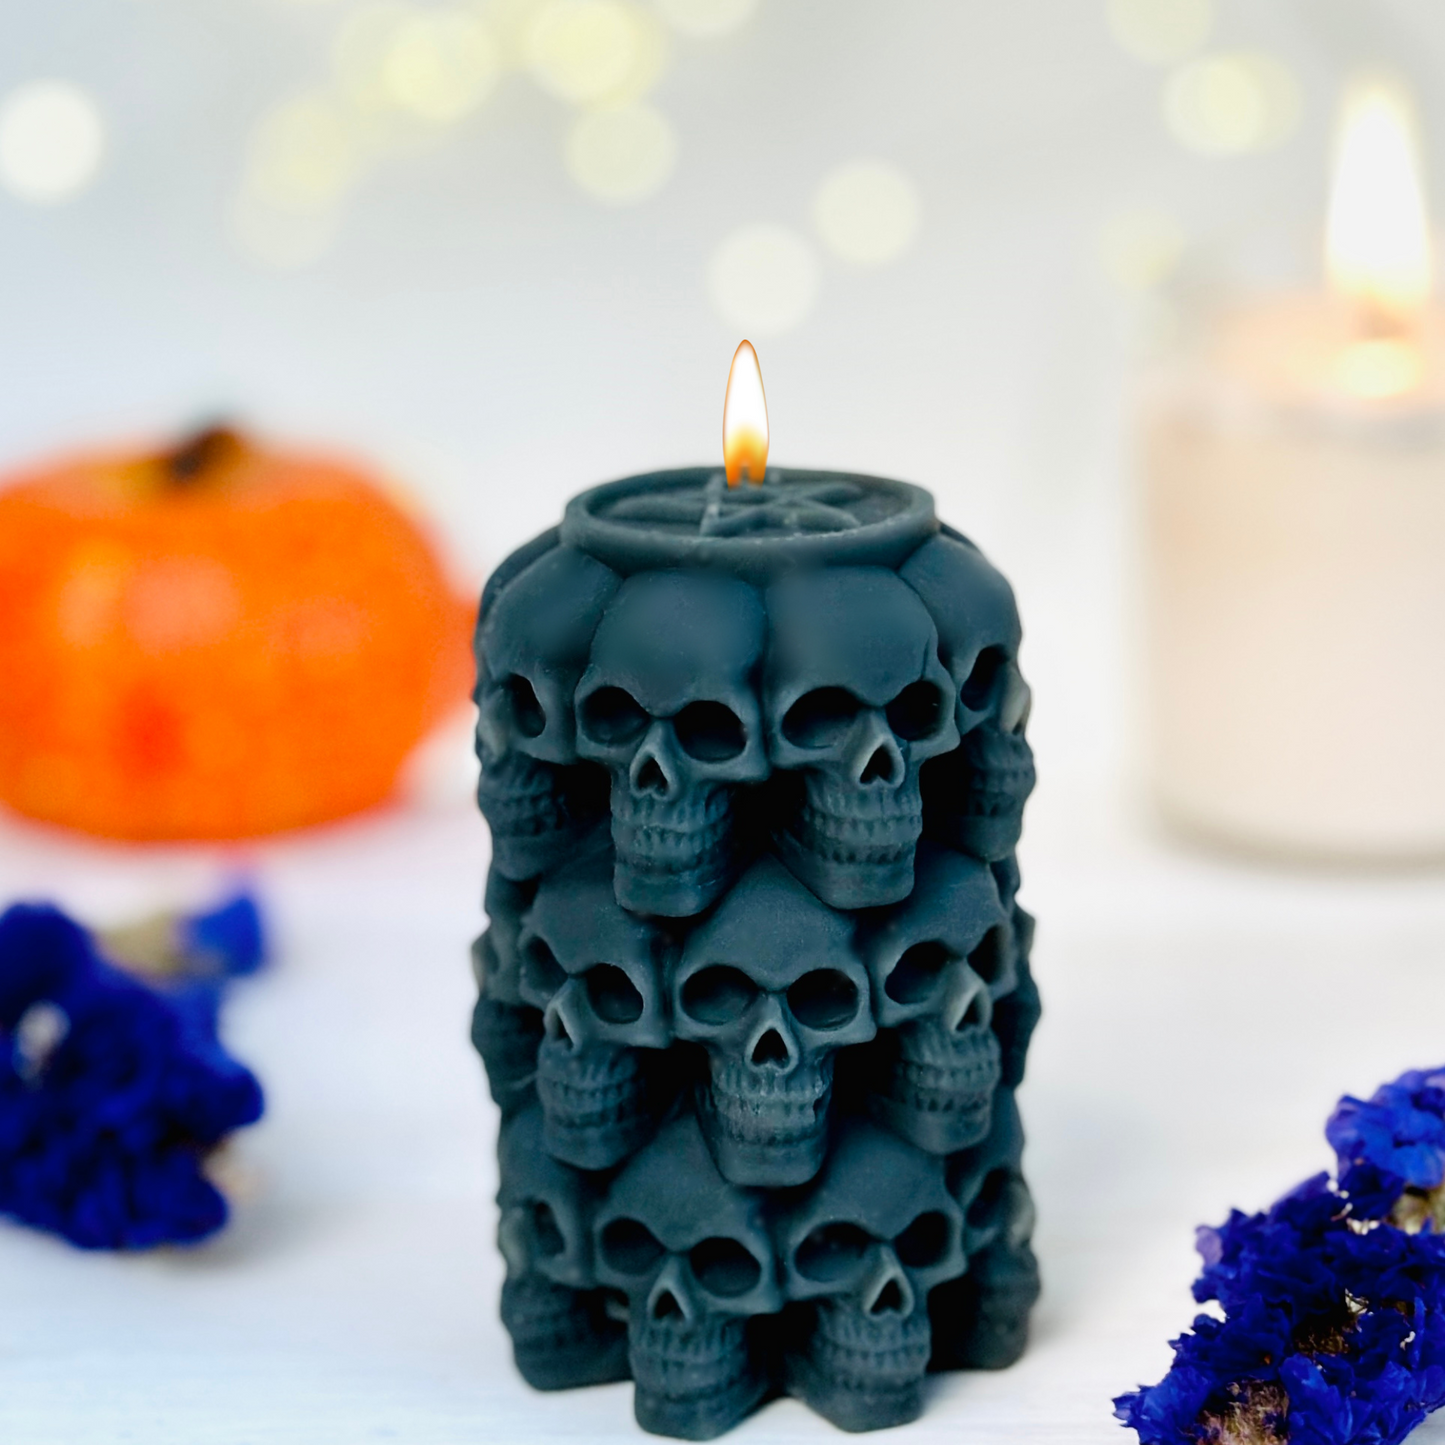 24 Skulls pillar candle mold / candle making silicone molds / Day of the dead and Spooky Halloween candle molds